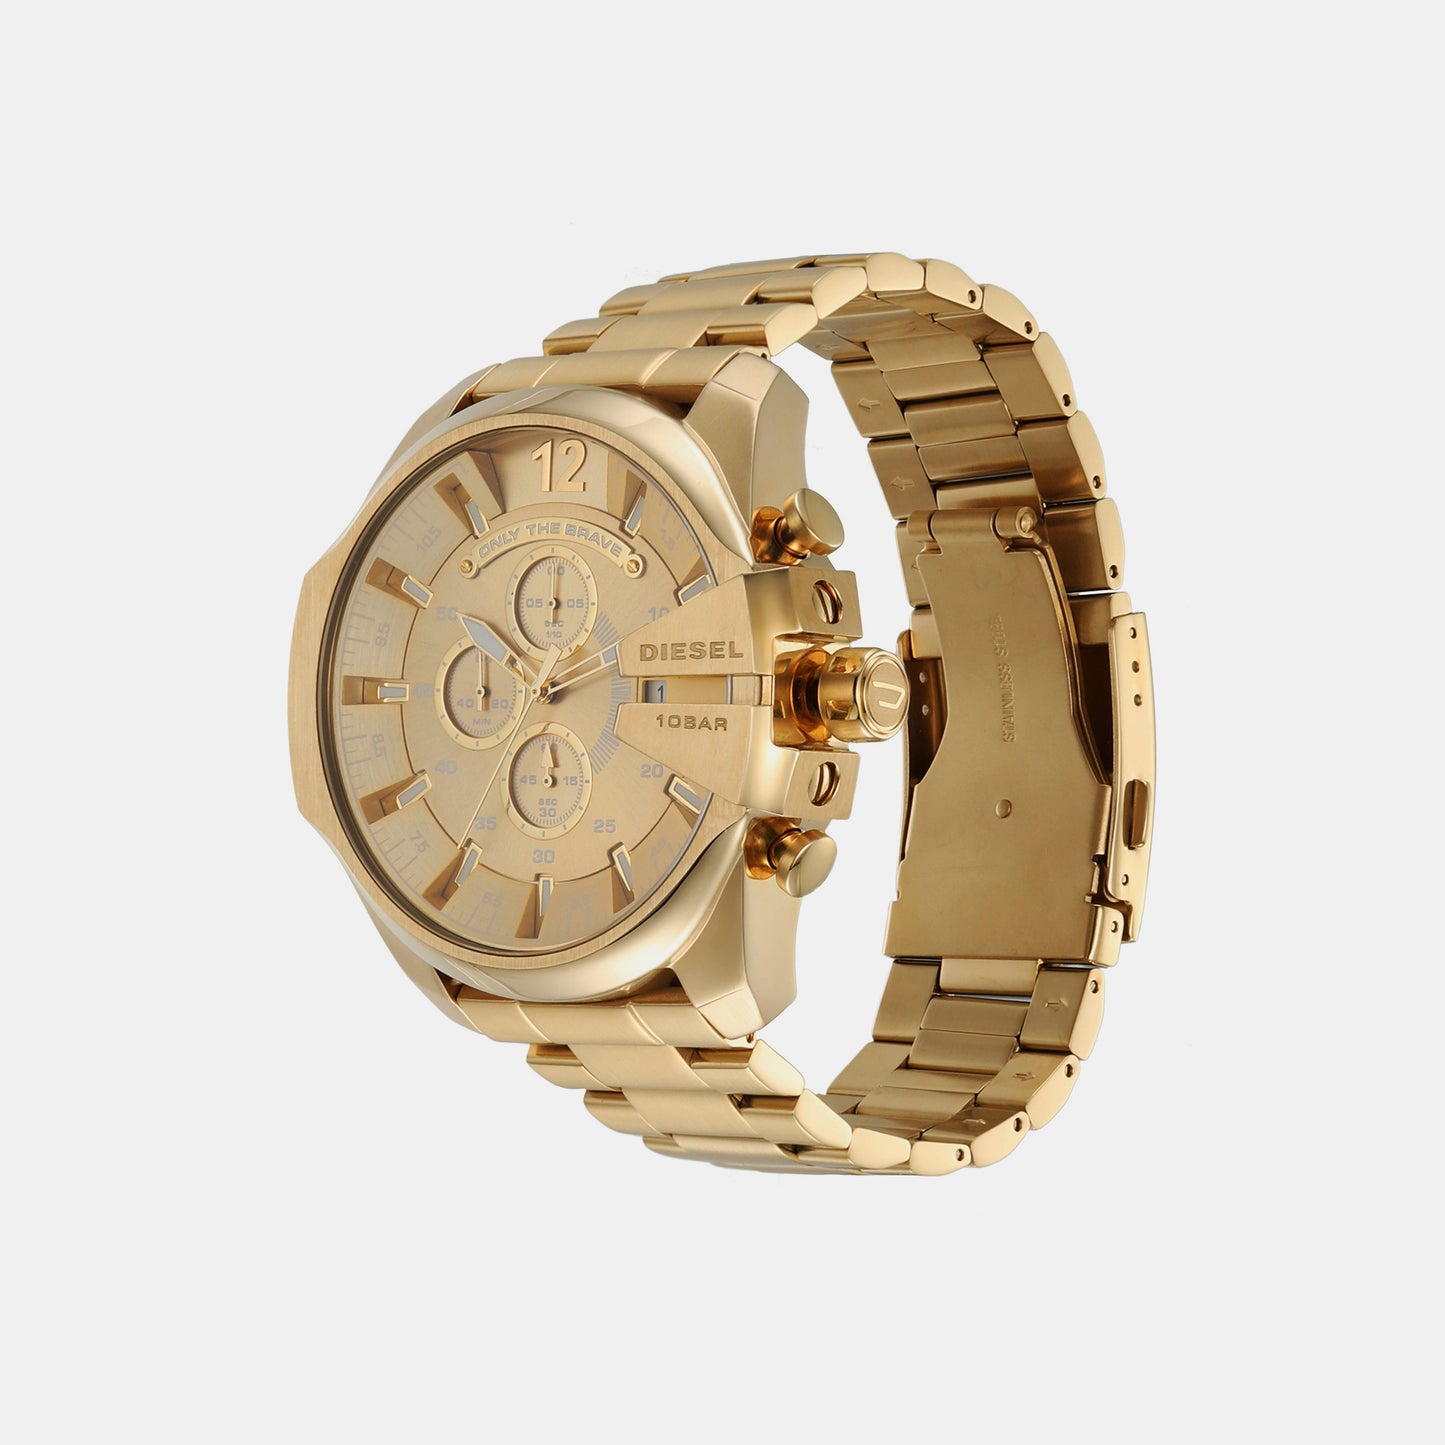 Male Gold Chronograph Stainless Steel Watch DZ4360